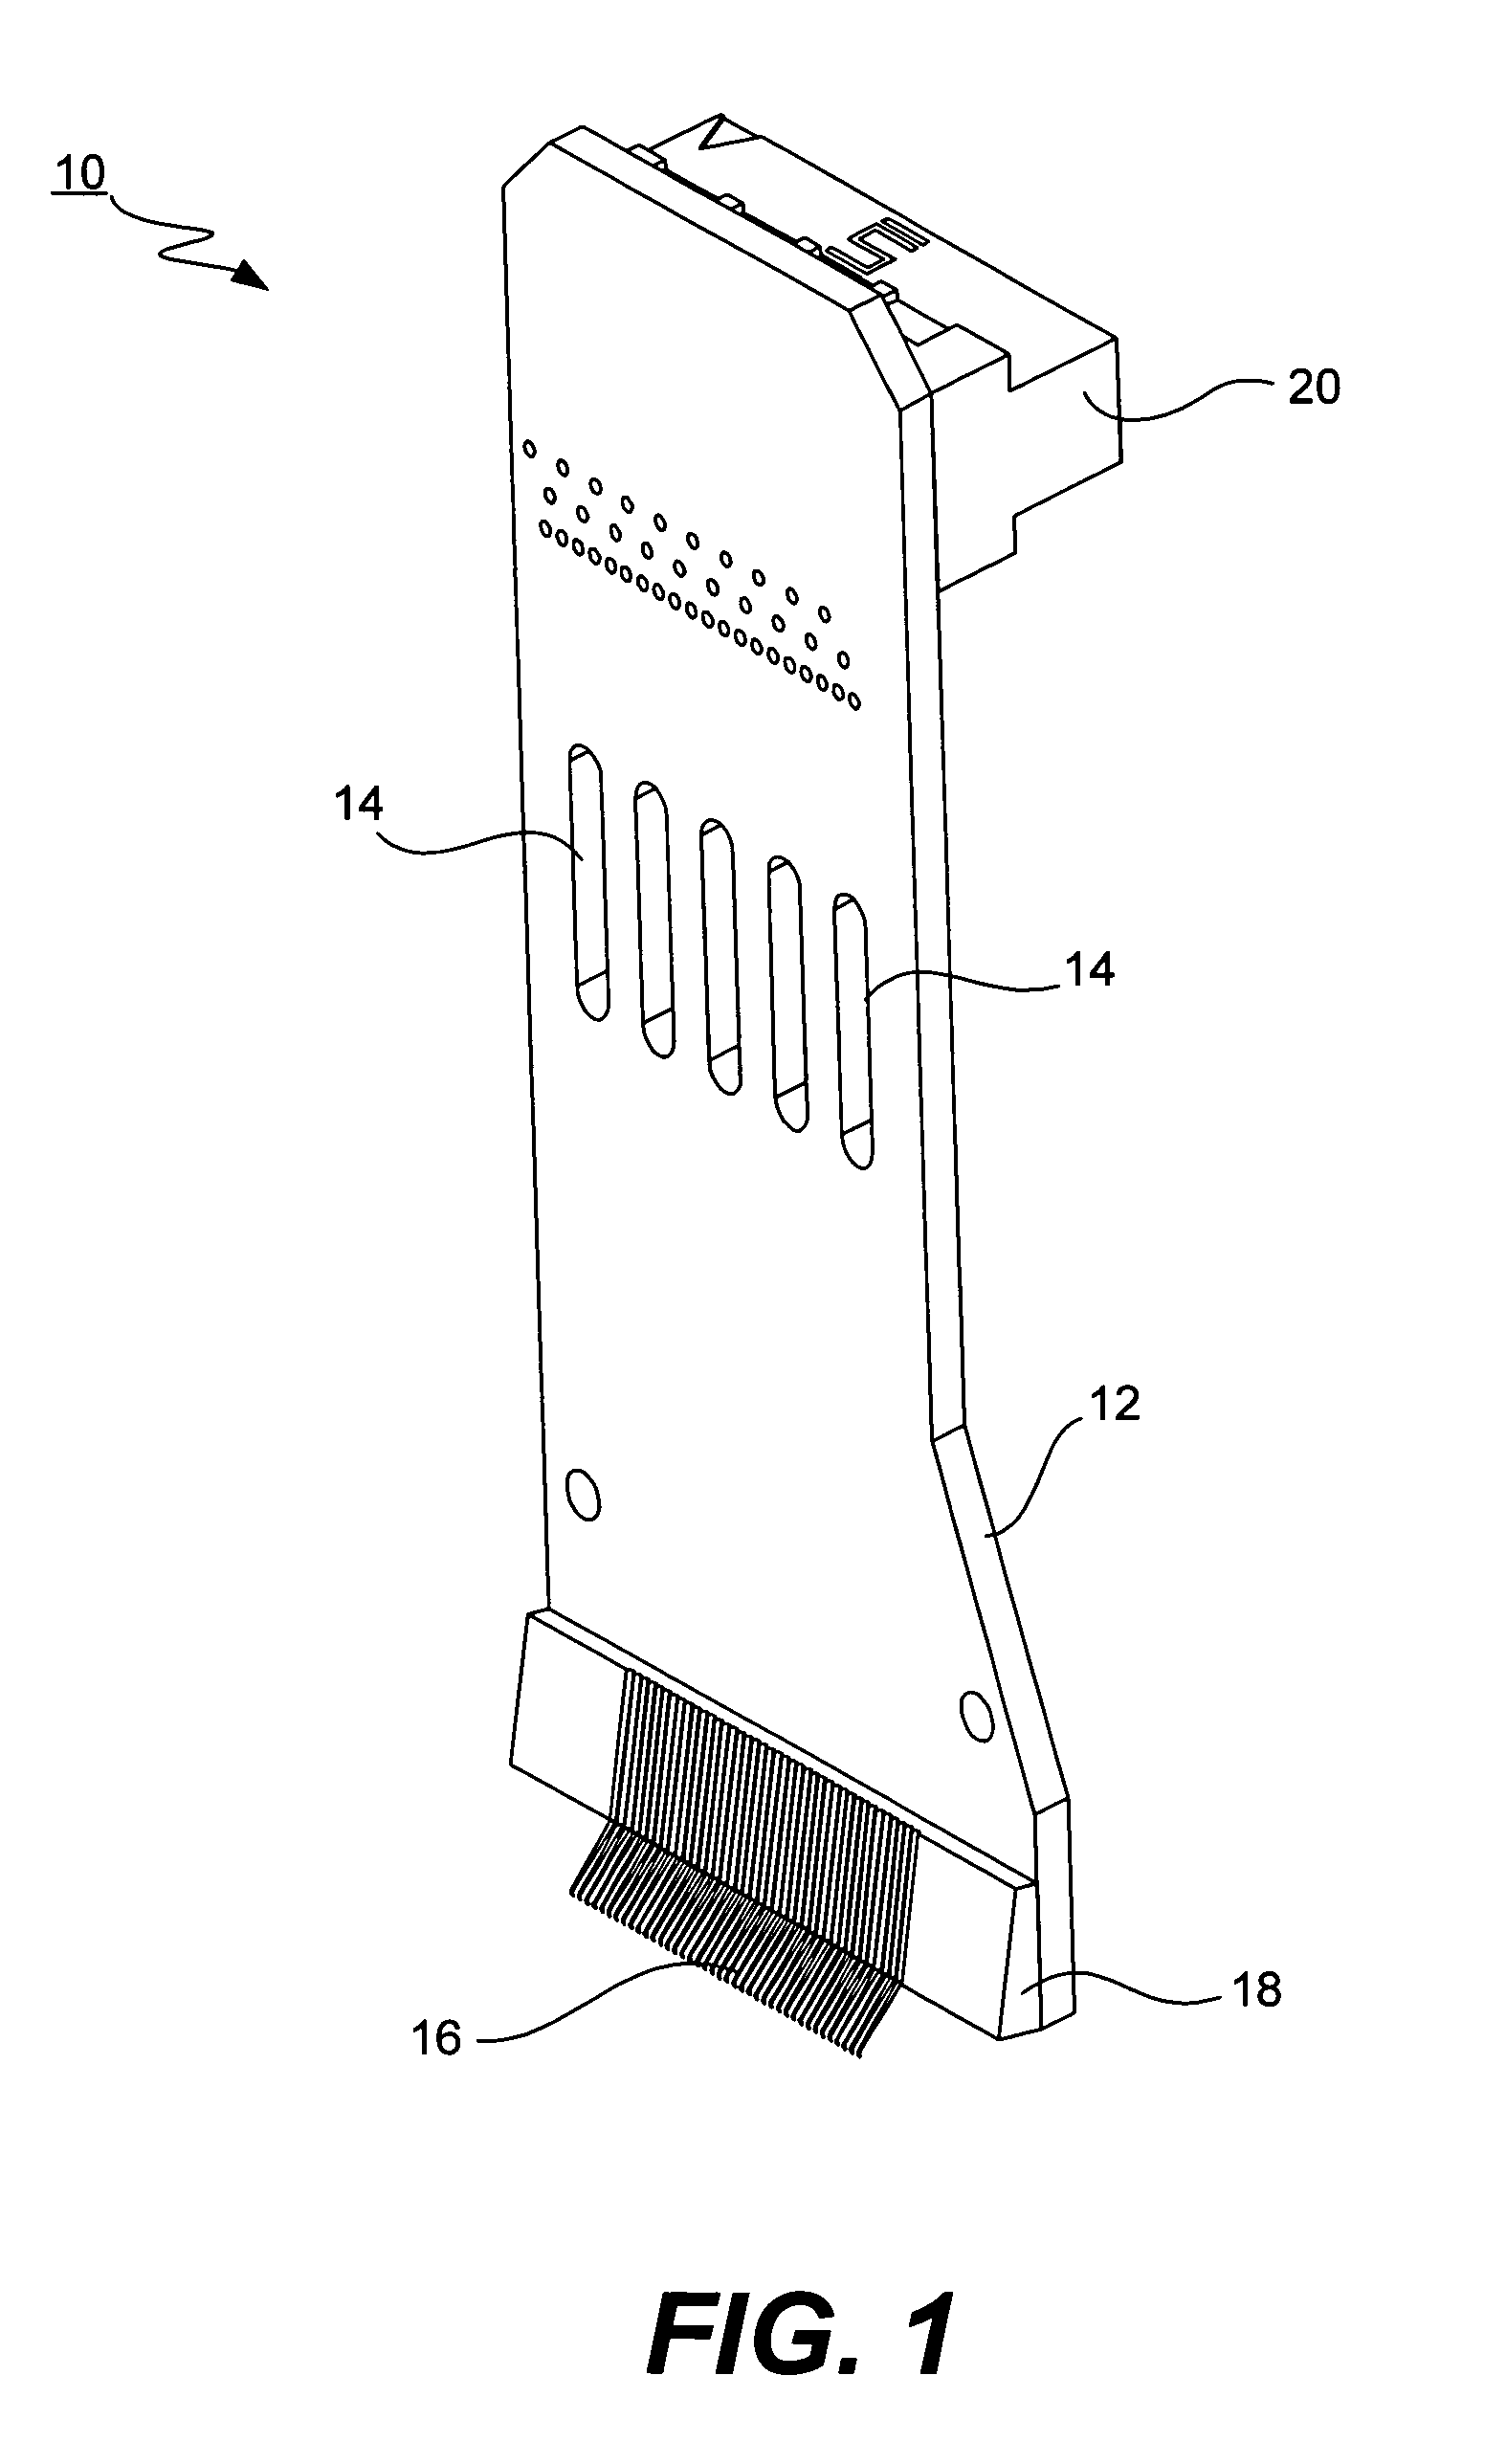 Vertical probe card and air cooled probe head system